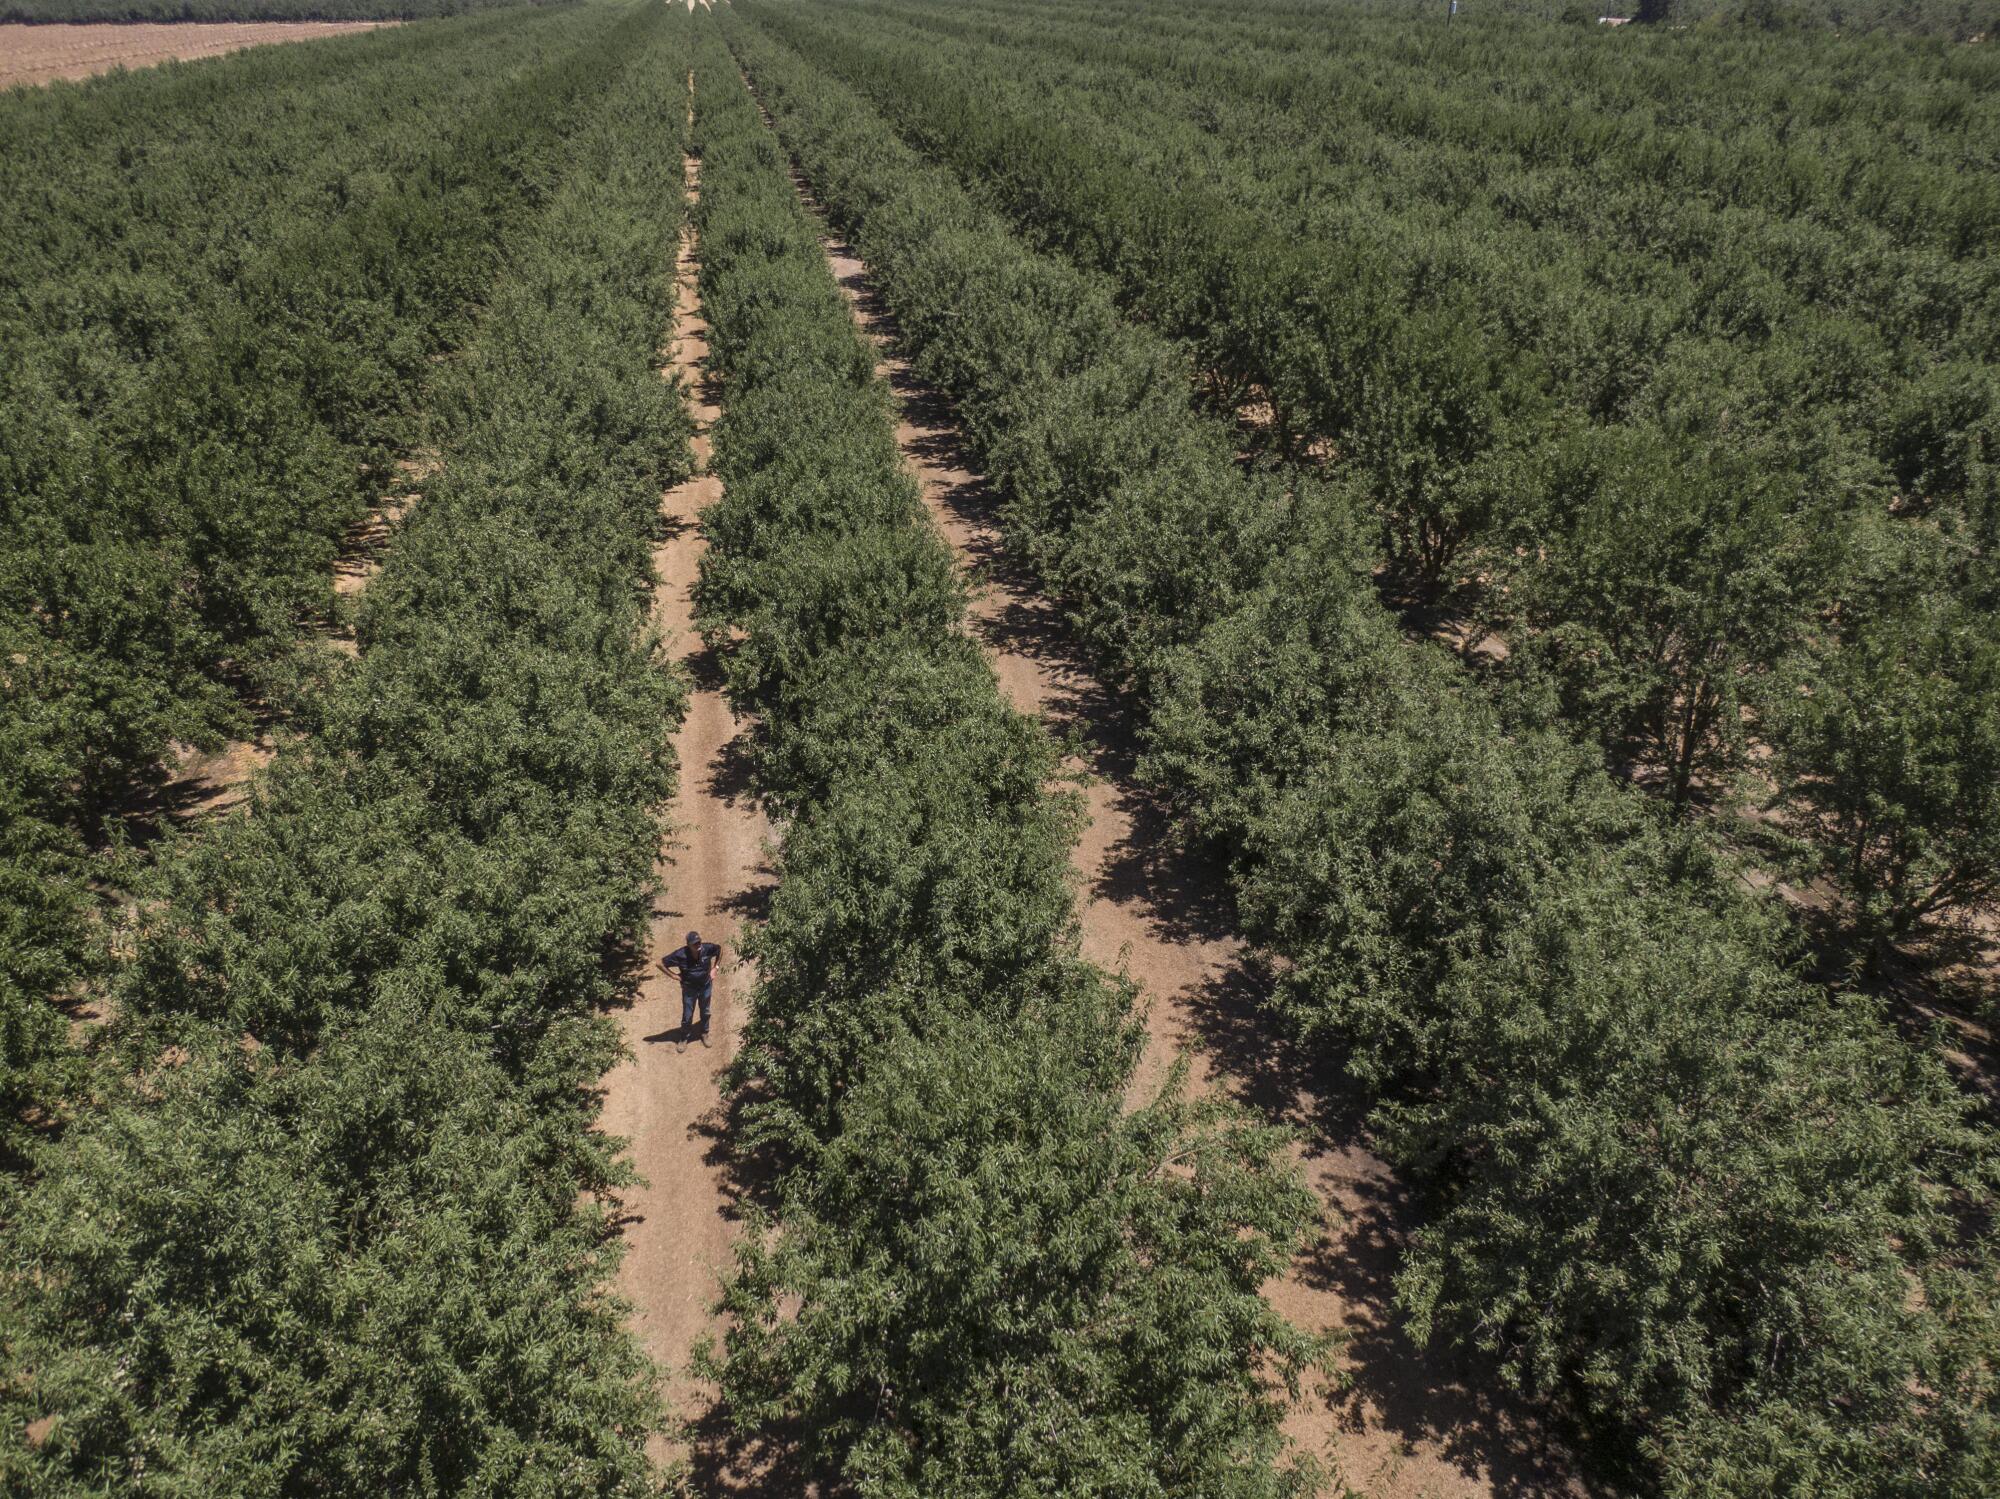 David Phippen walks through one of his producing almond orchards in Manteca.